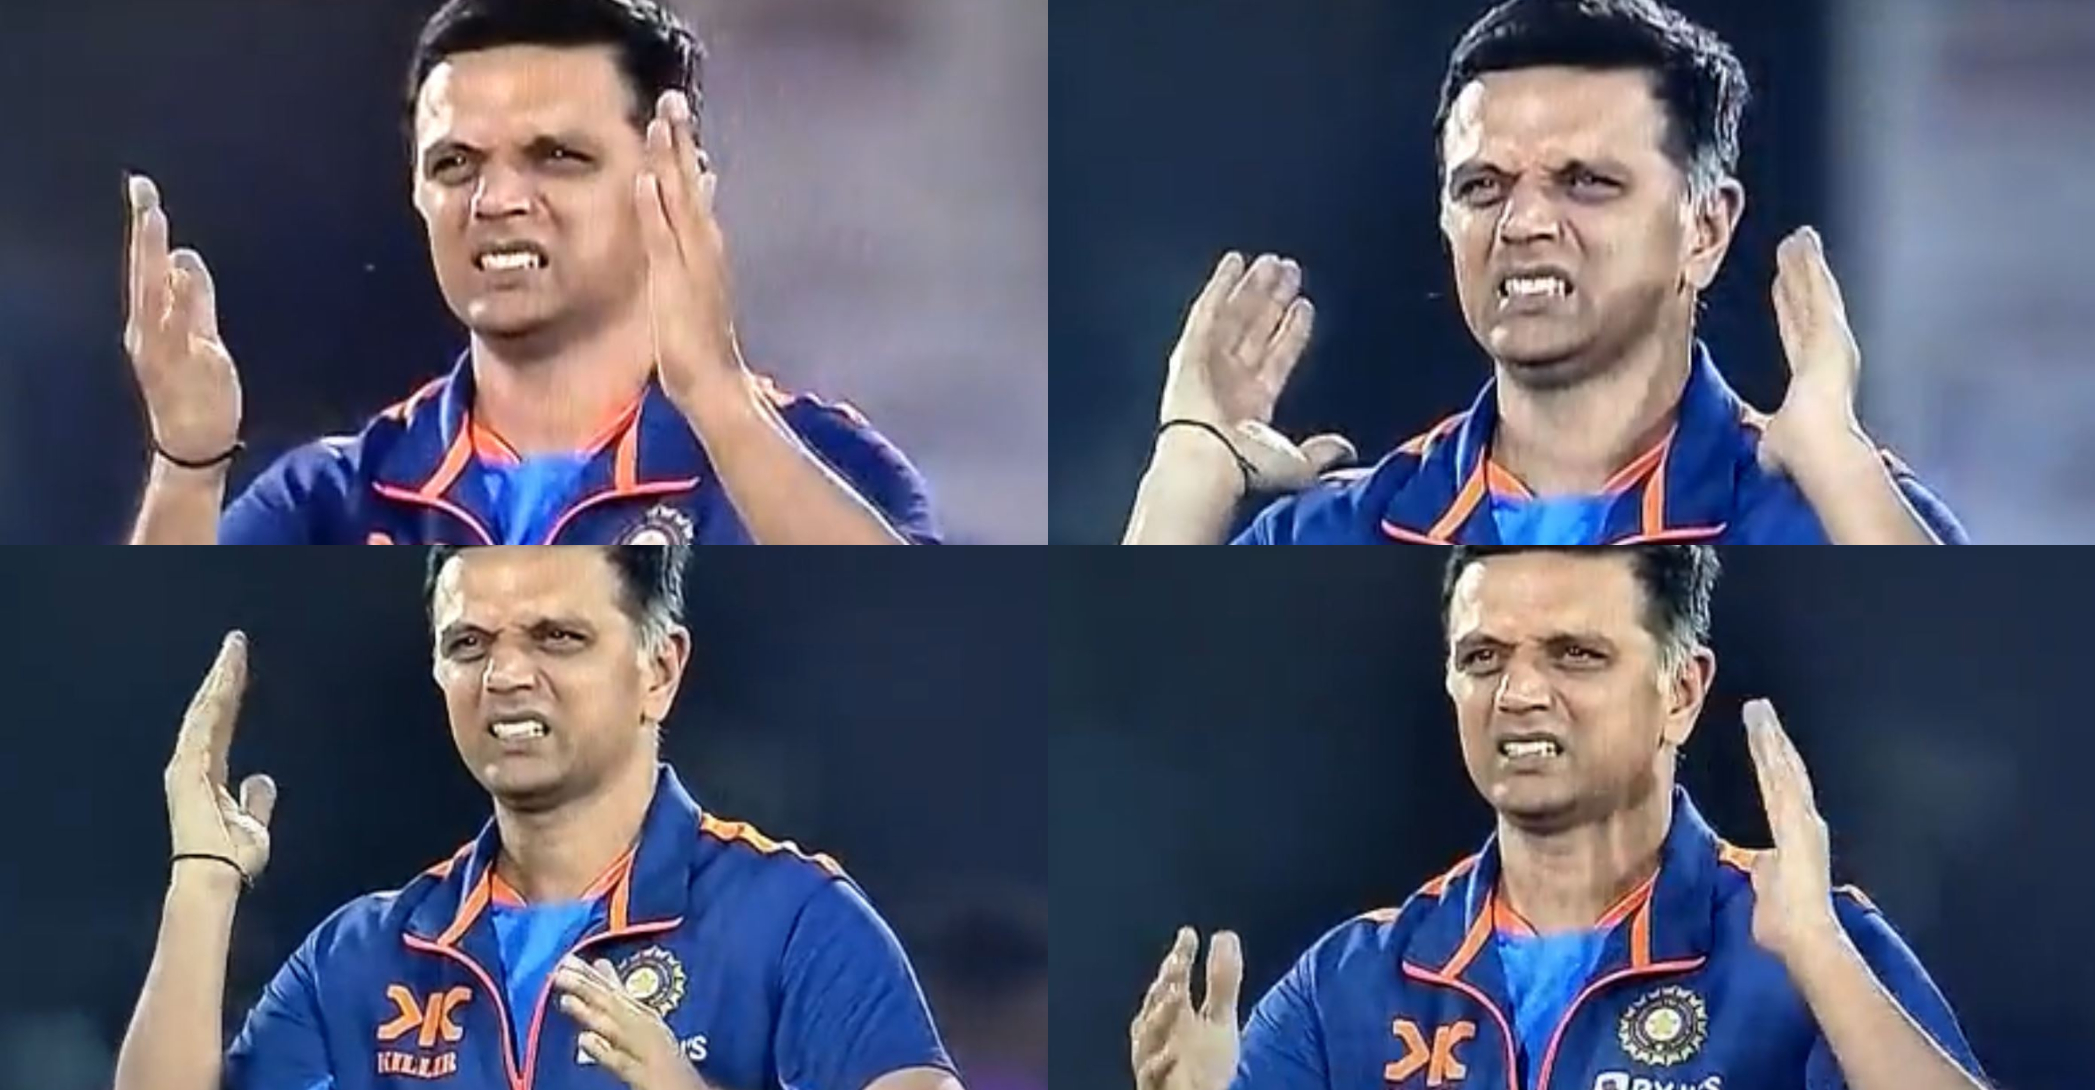 Rahul Dravid made some intriguing signals | Twitter